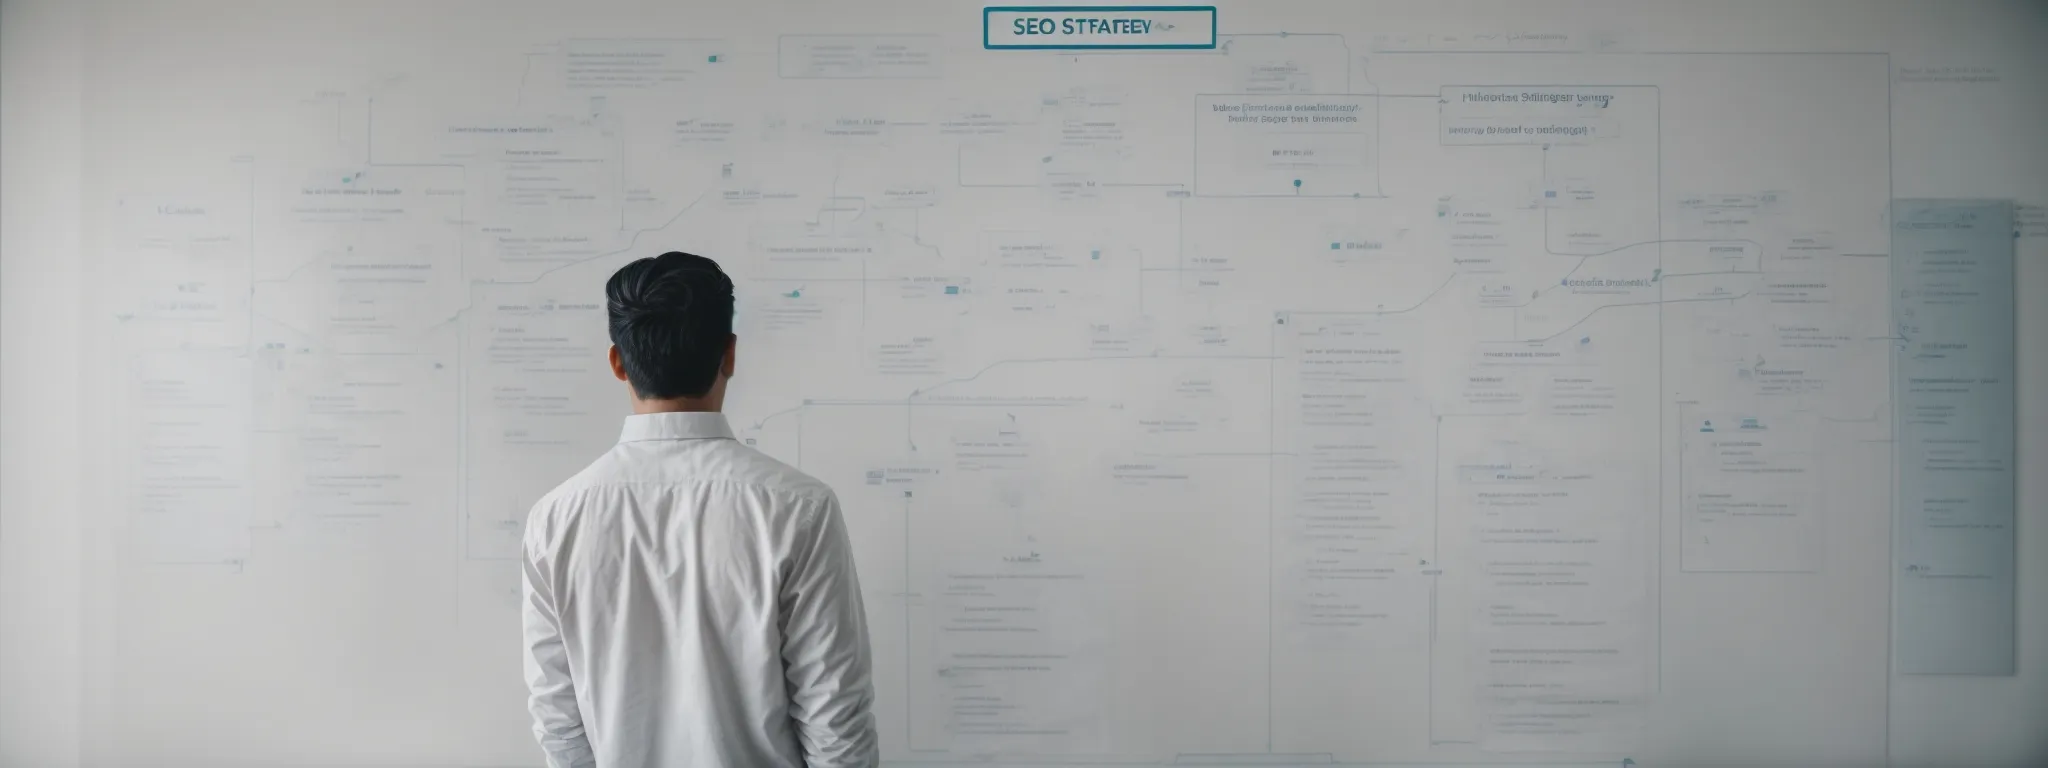 a person standing before a large whiteboard, with a flowchart depicting various stages of an seo strategy.